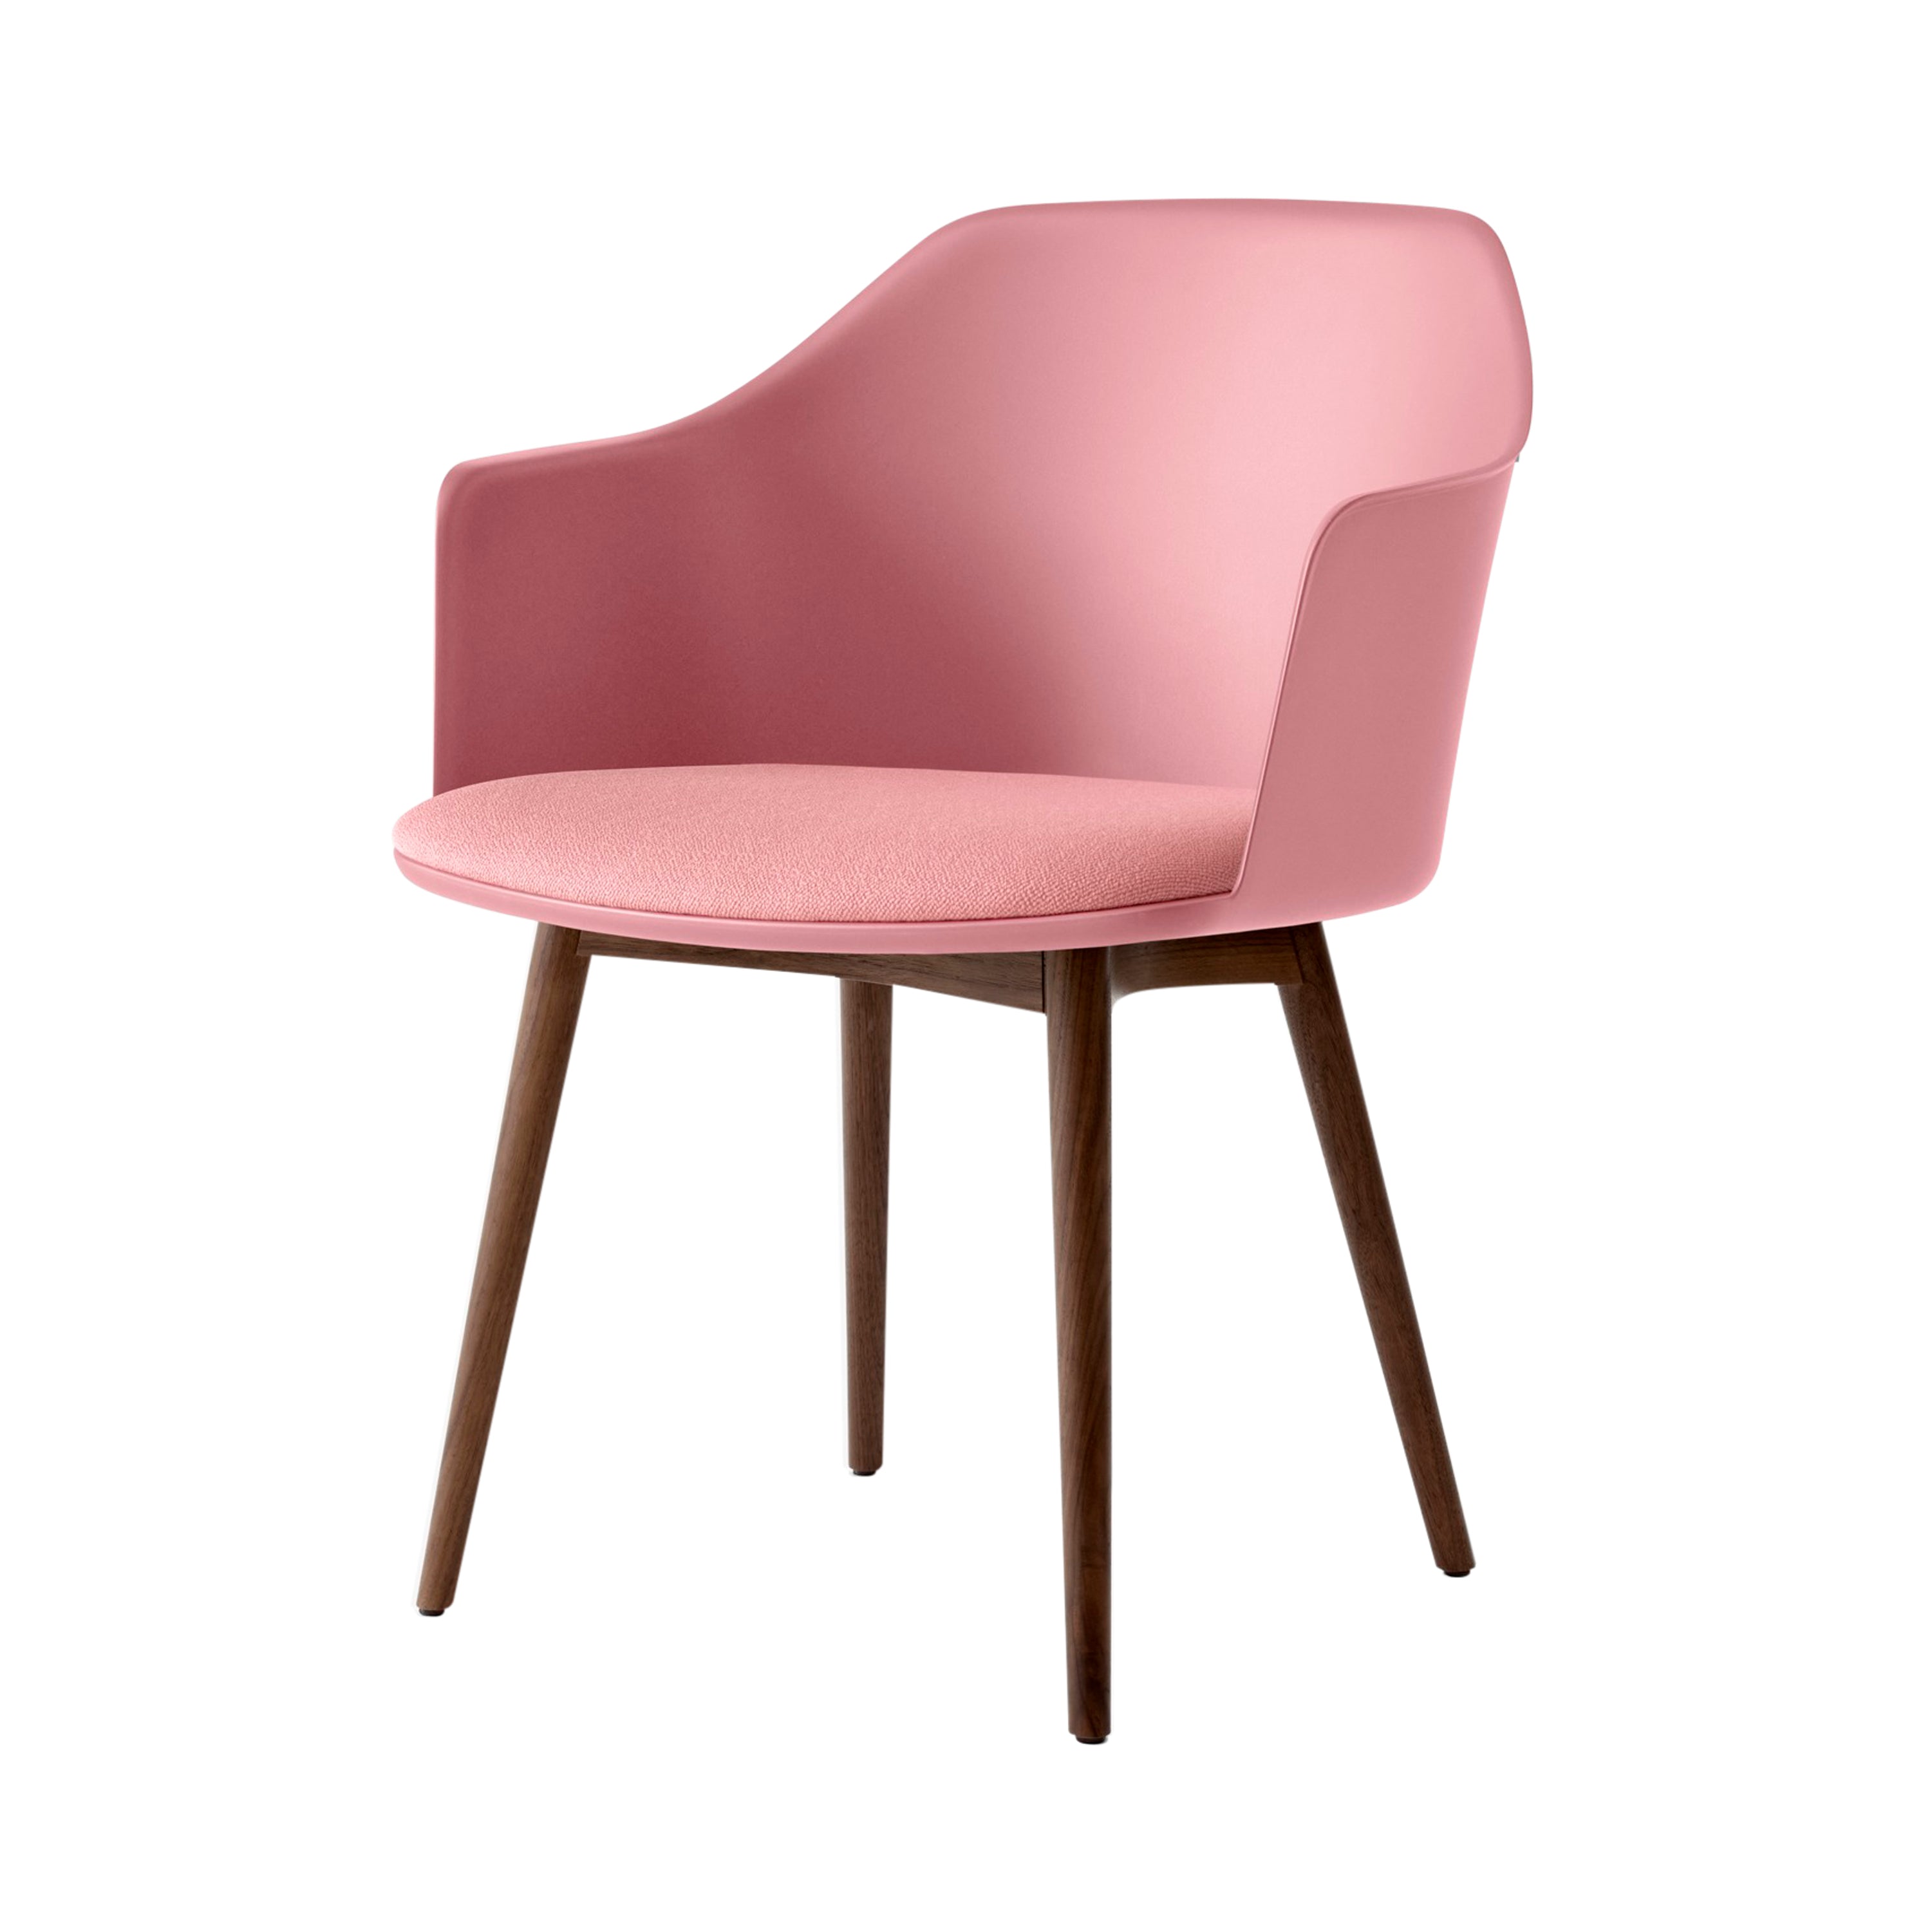 Rely Armchair HW77: Soft Pink + Walnut